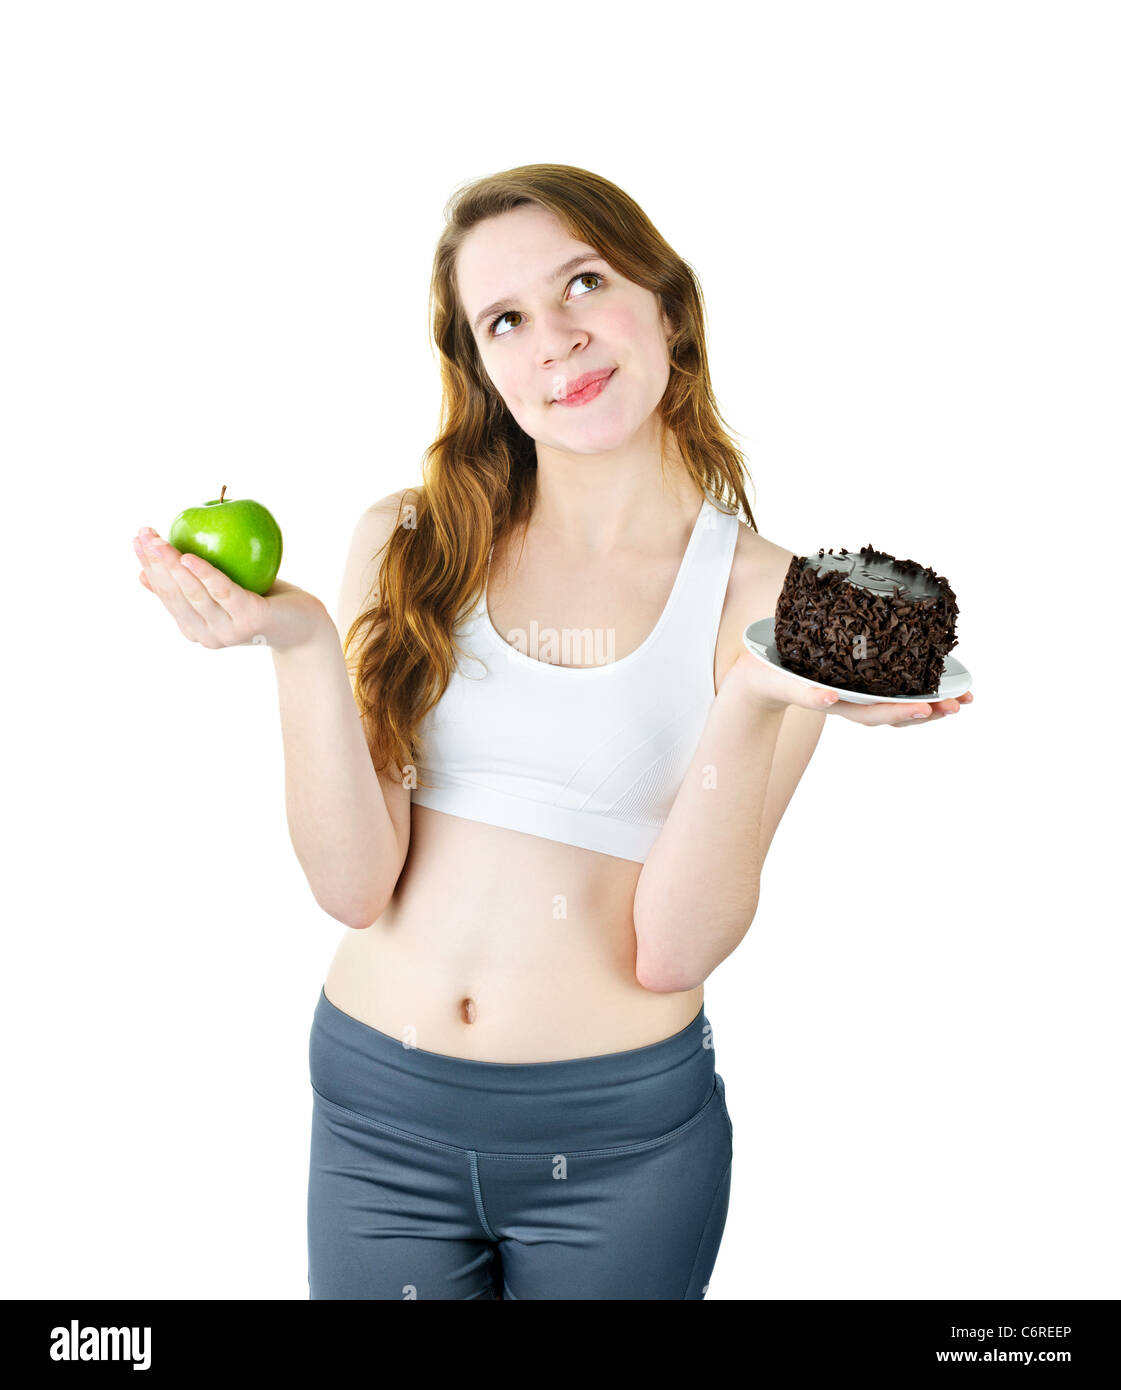 Tempted young woman holding apple and chocolate cake making a choice Stock Photo